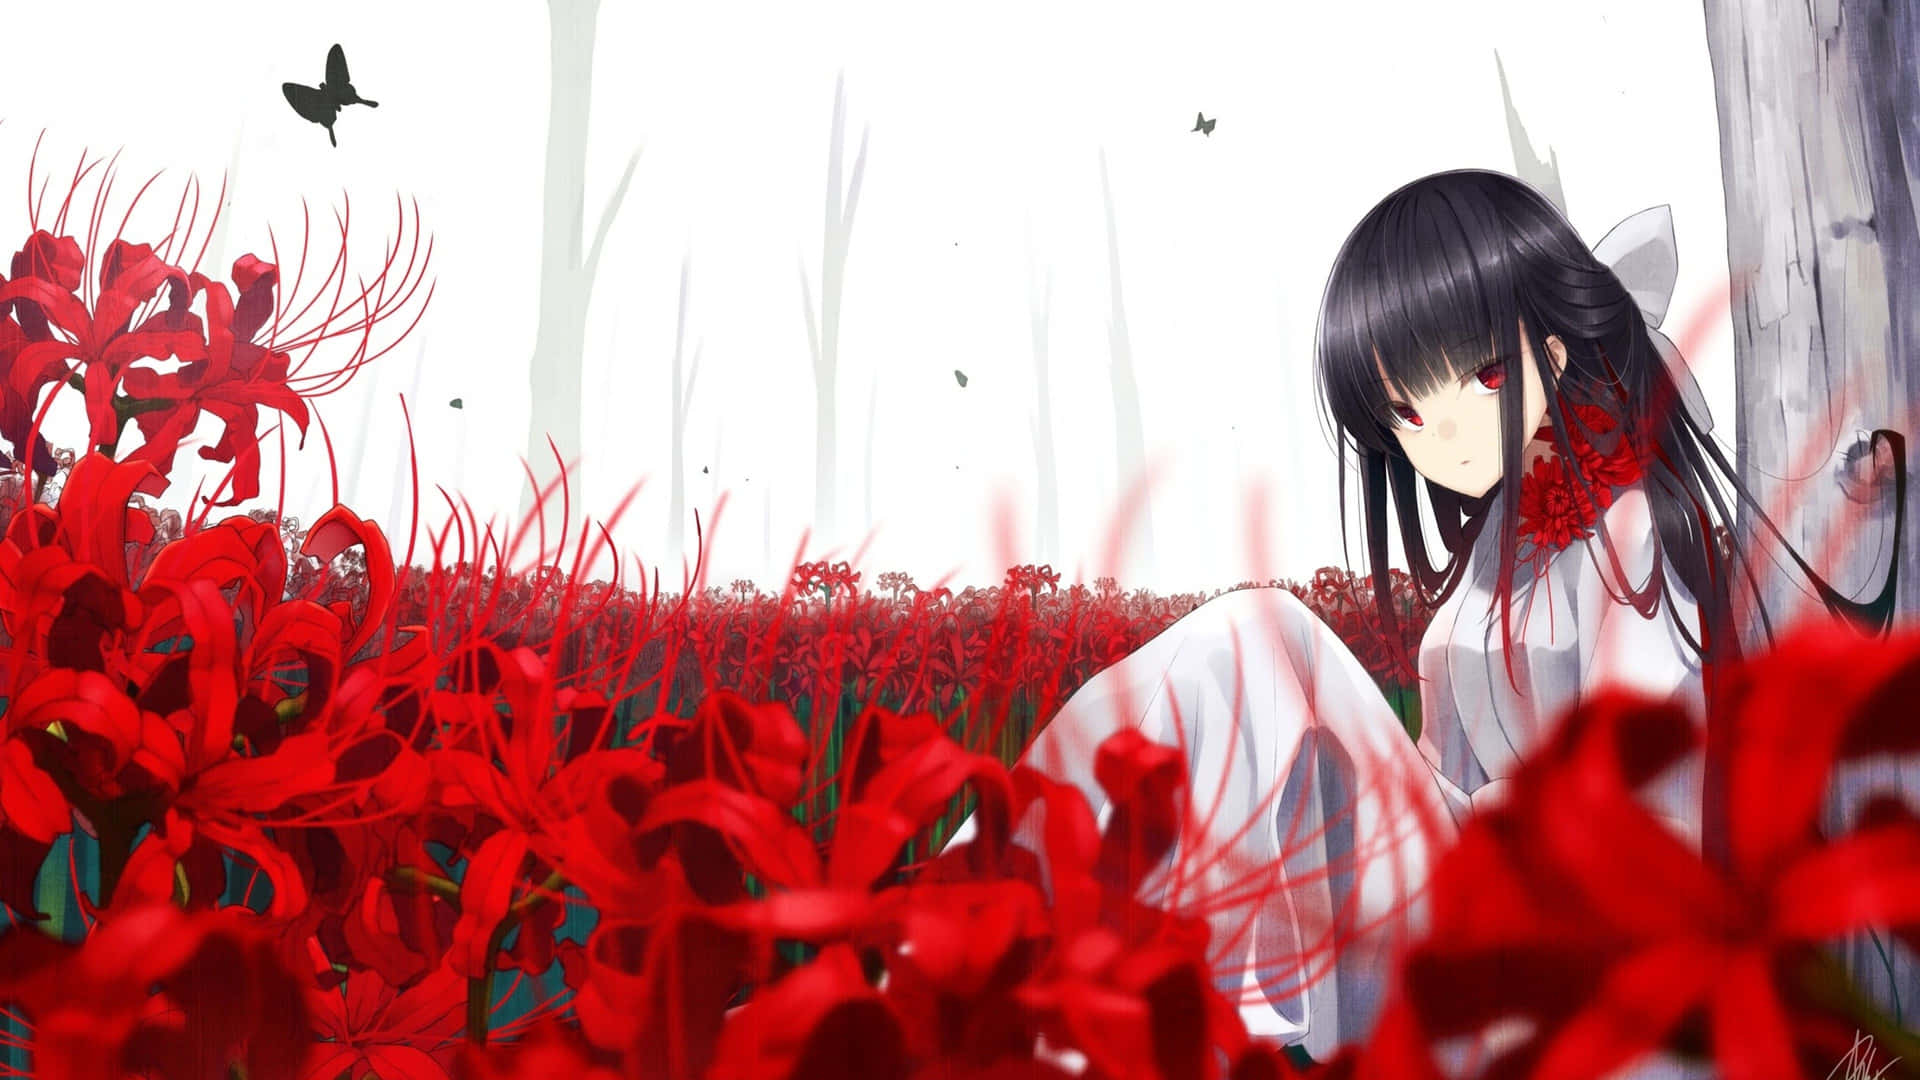 Black Anime Girl And Red Flowers Wallpaper